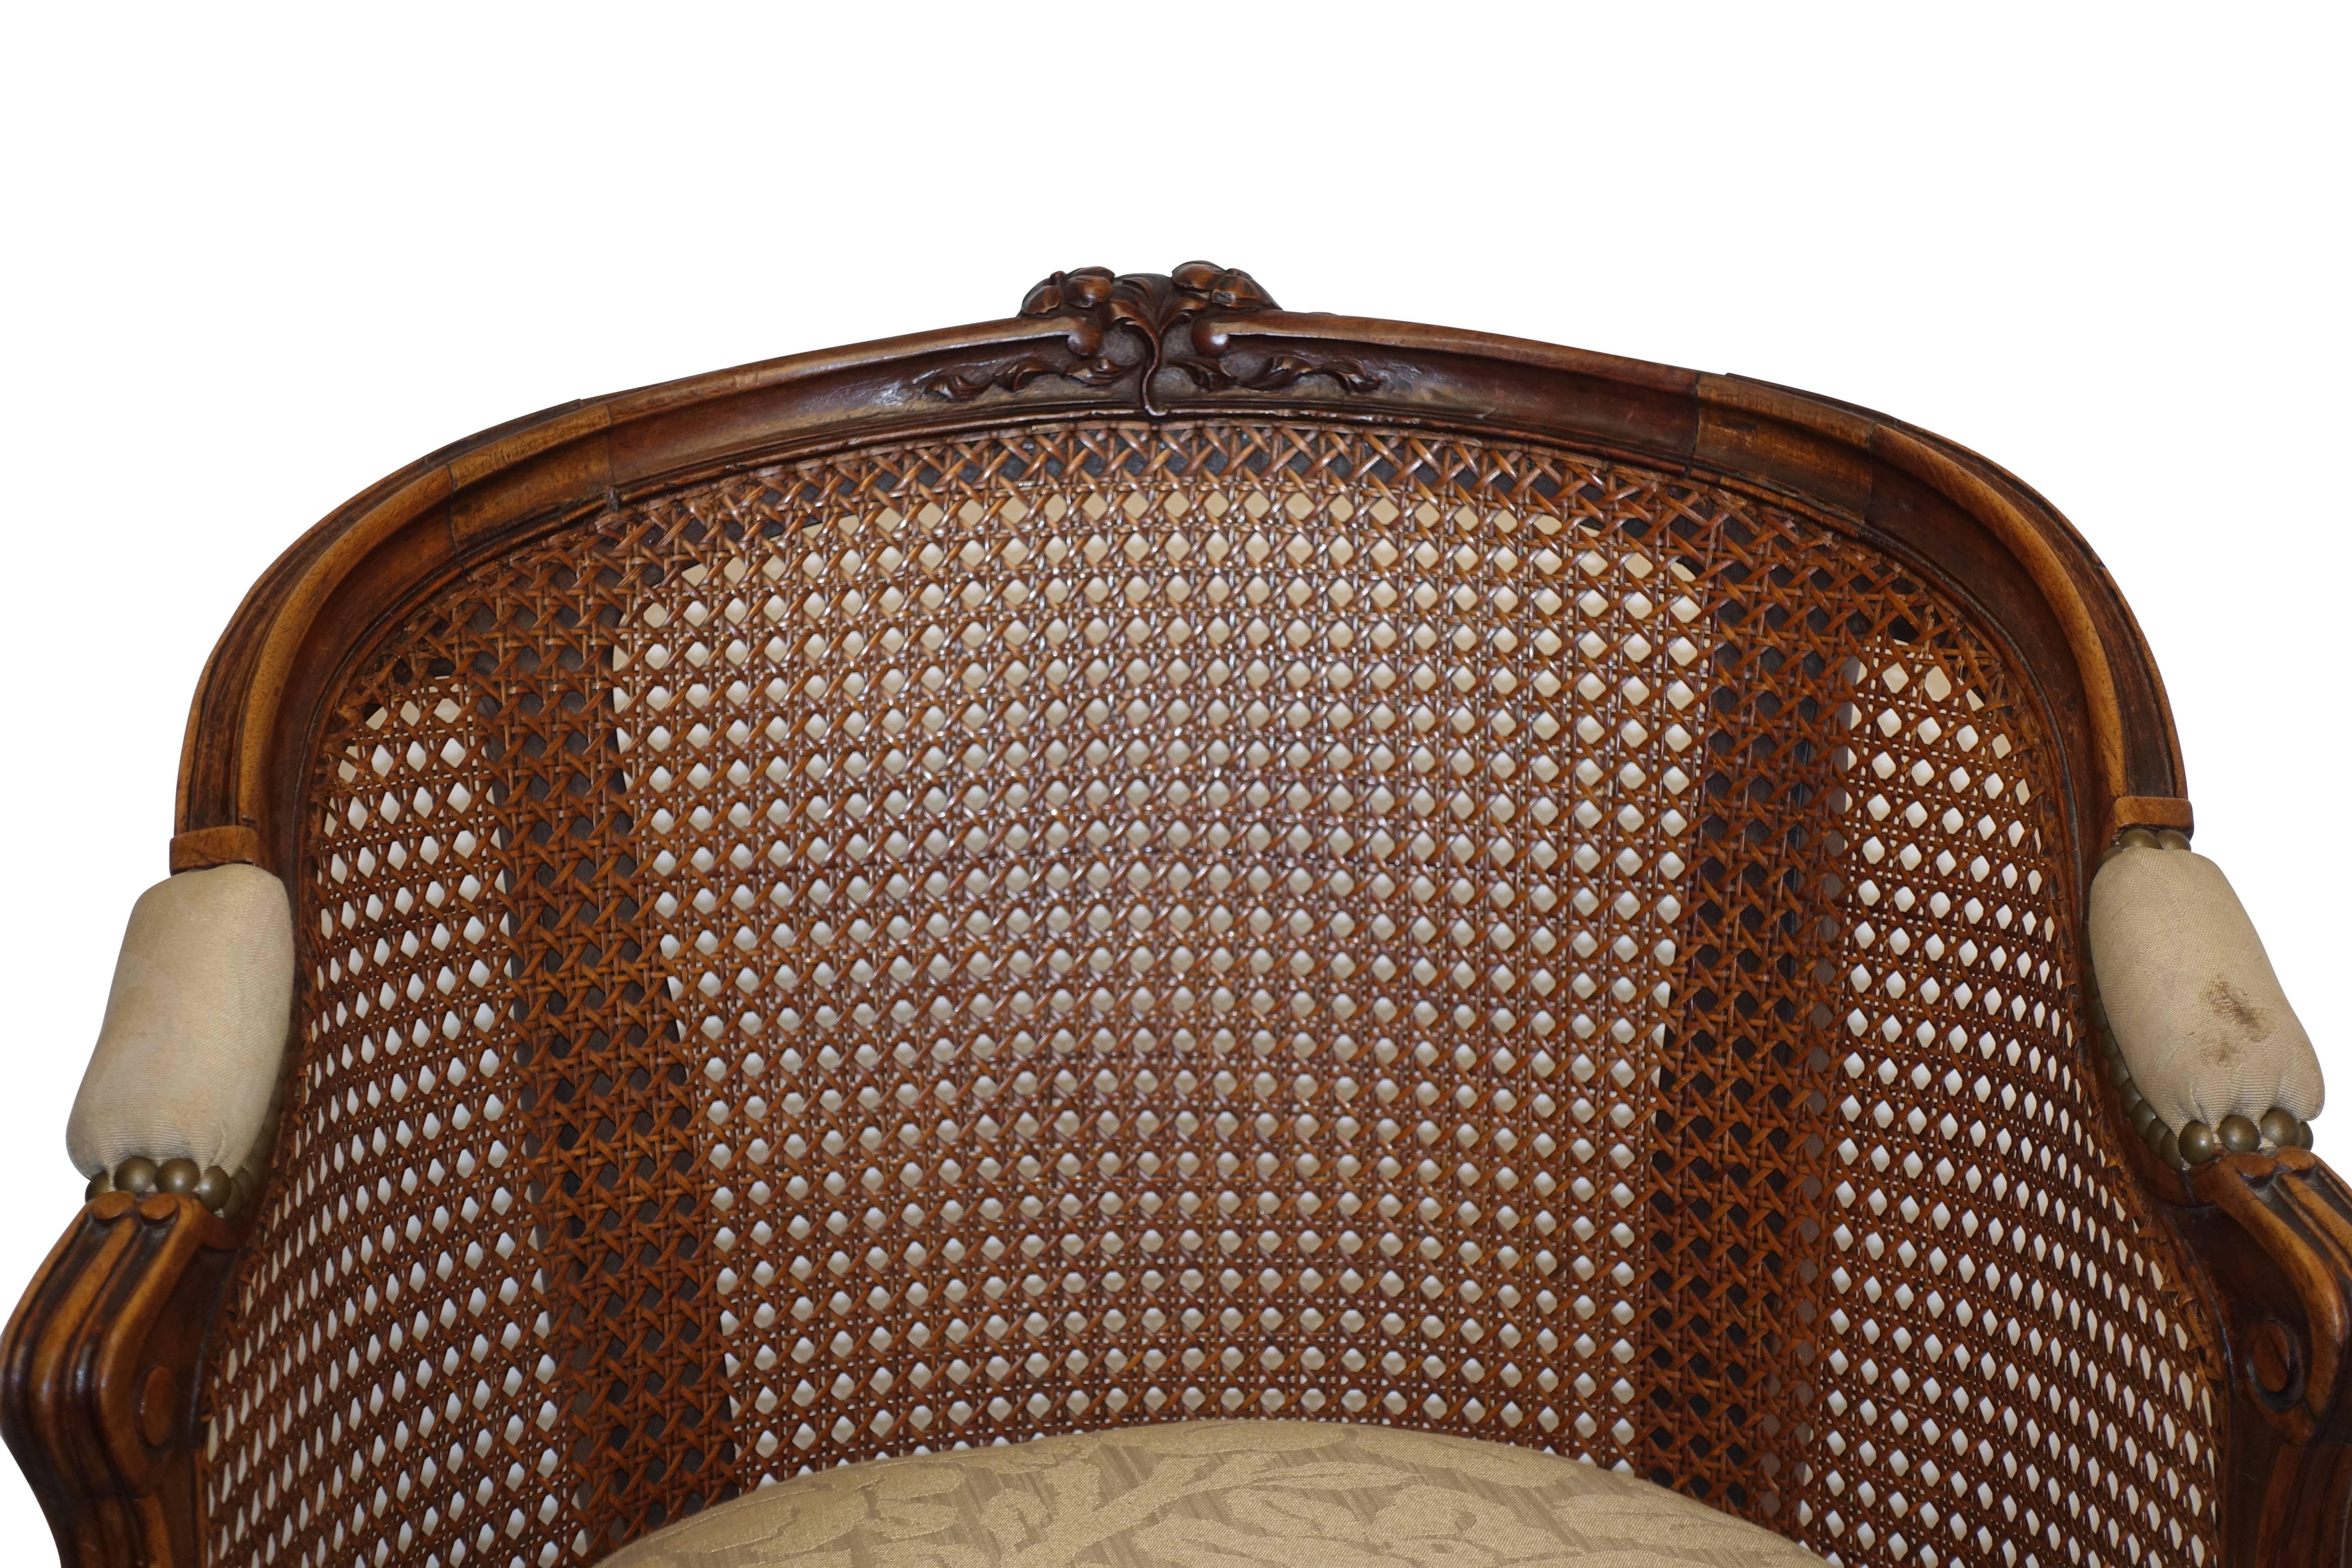 Cane Louis XVI Style Carved Walnut Desk or Vanity Chair, French, circa 1880